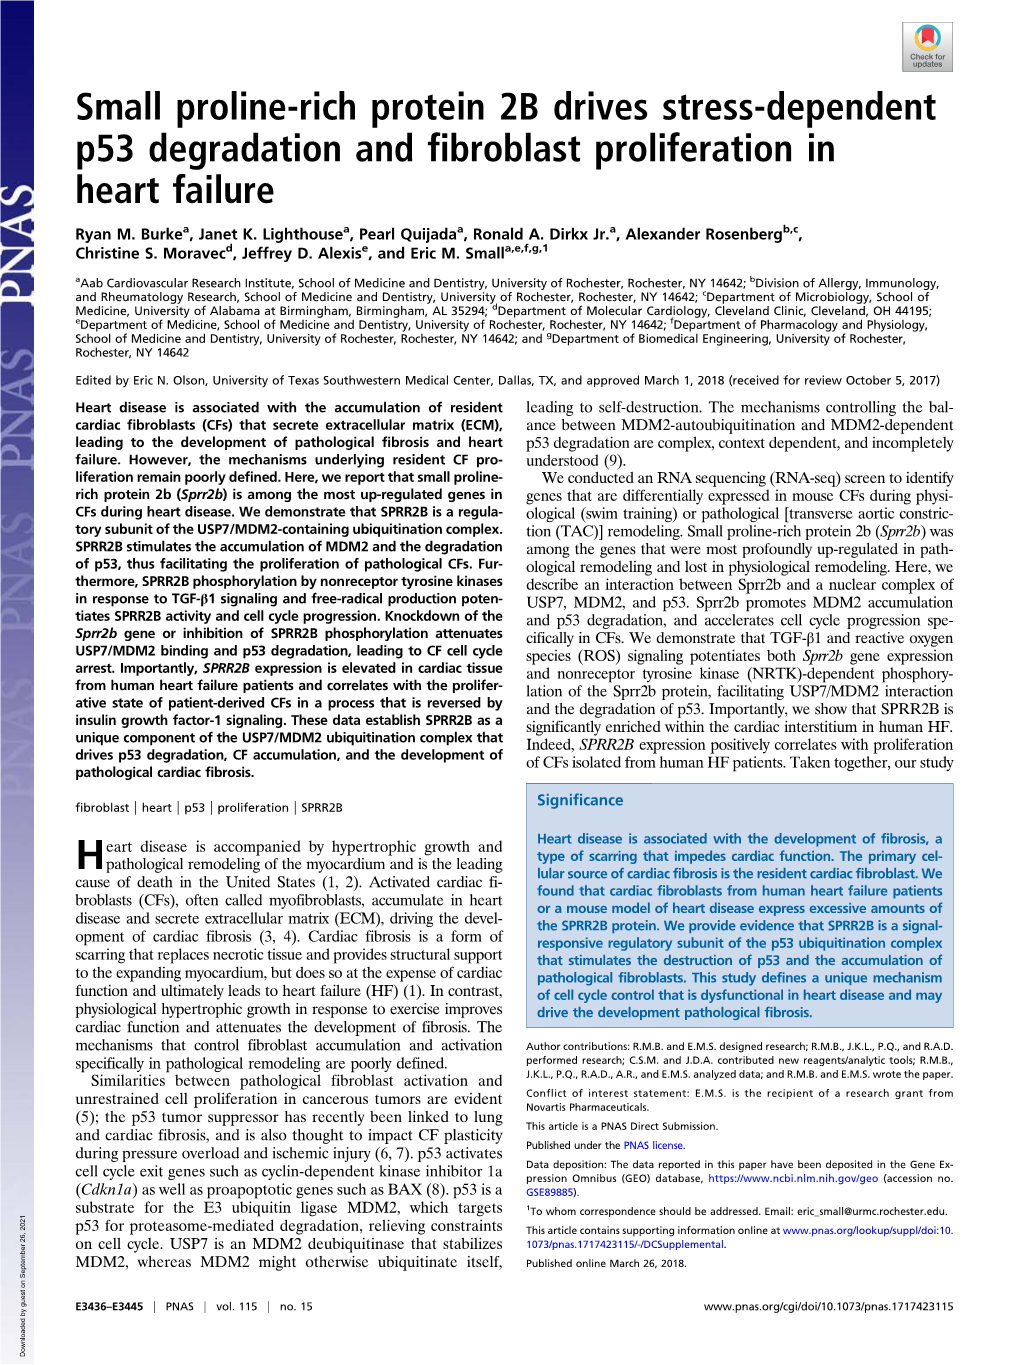 Small Proline-Rich Protein 2B Drives Stress-Dependent P53 Degradation and Fibroblast Proliferation in Heart Failure